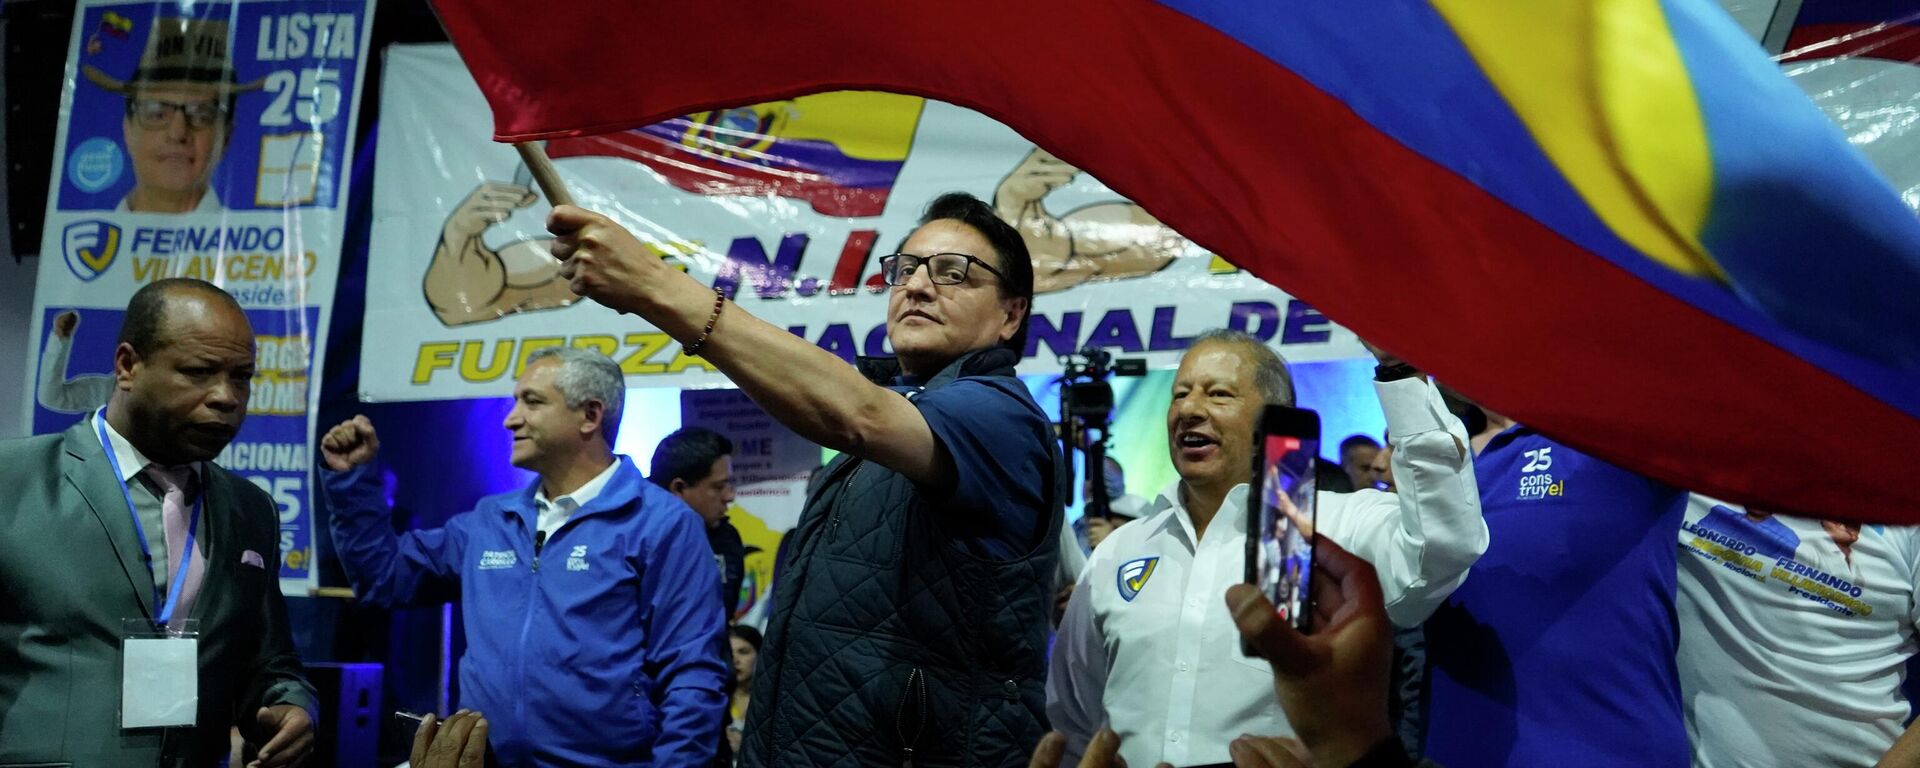 Presidential candidate Fernando Villavicencio waves an Ecuadorean  flag during a campaign event at a school minutes before he was shot to death outside the same school in Quito, Ecuador - Sputnik Africa, 1920, 10.08.2023